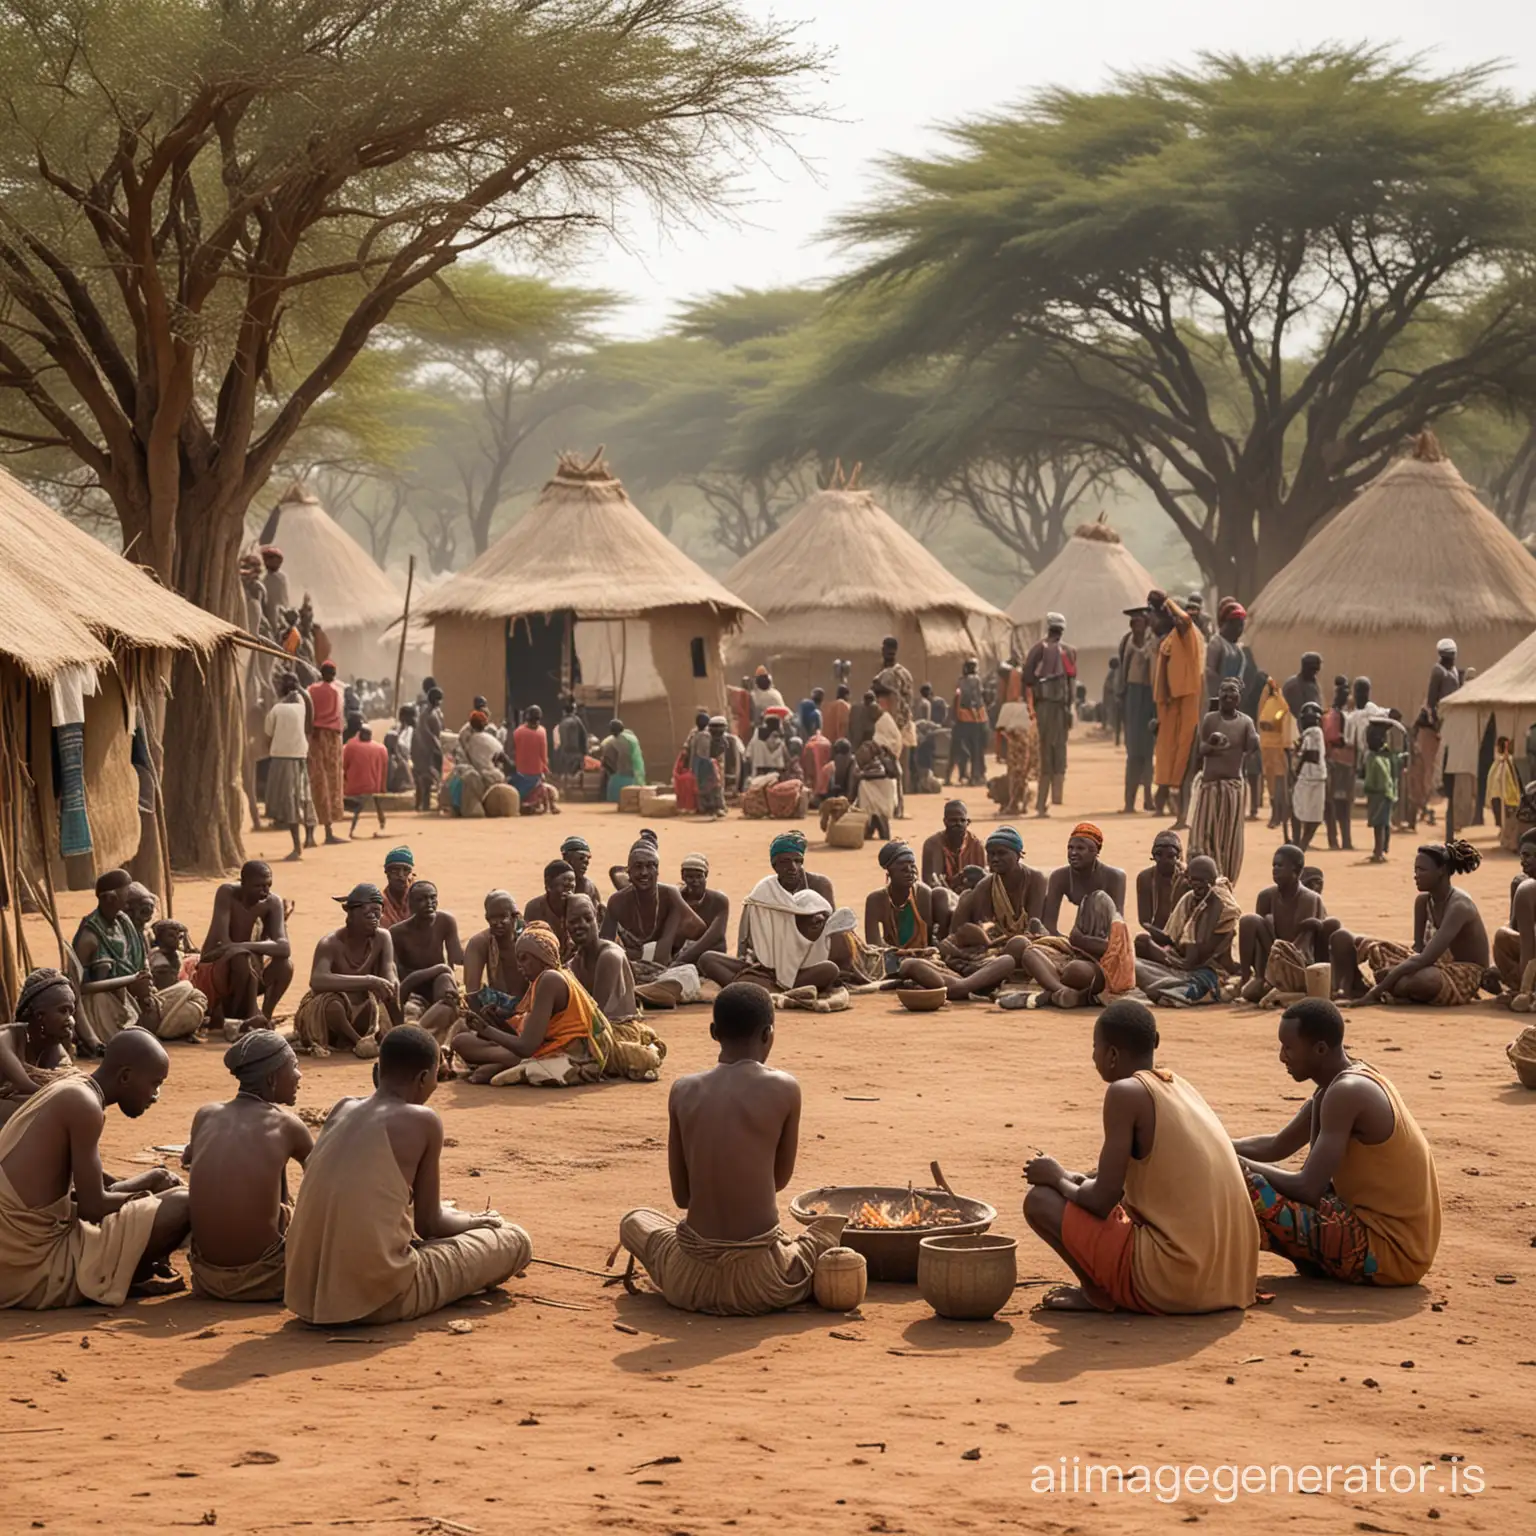 African villagers gathering in an African set up